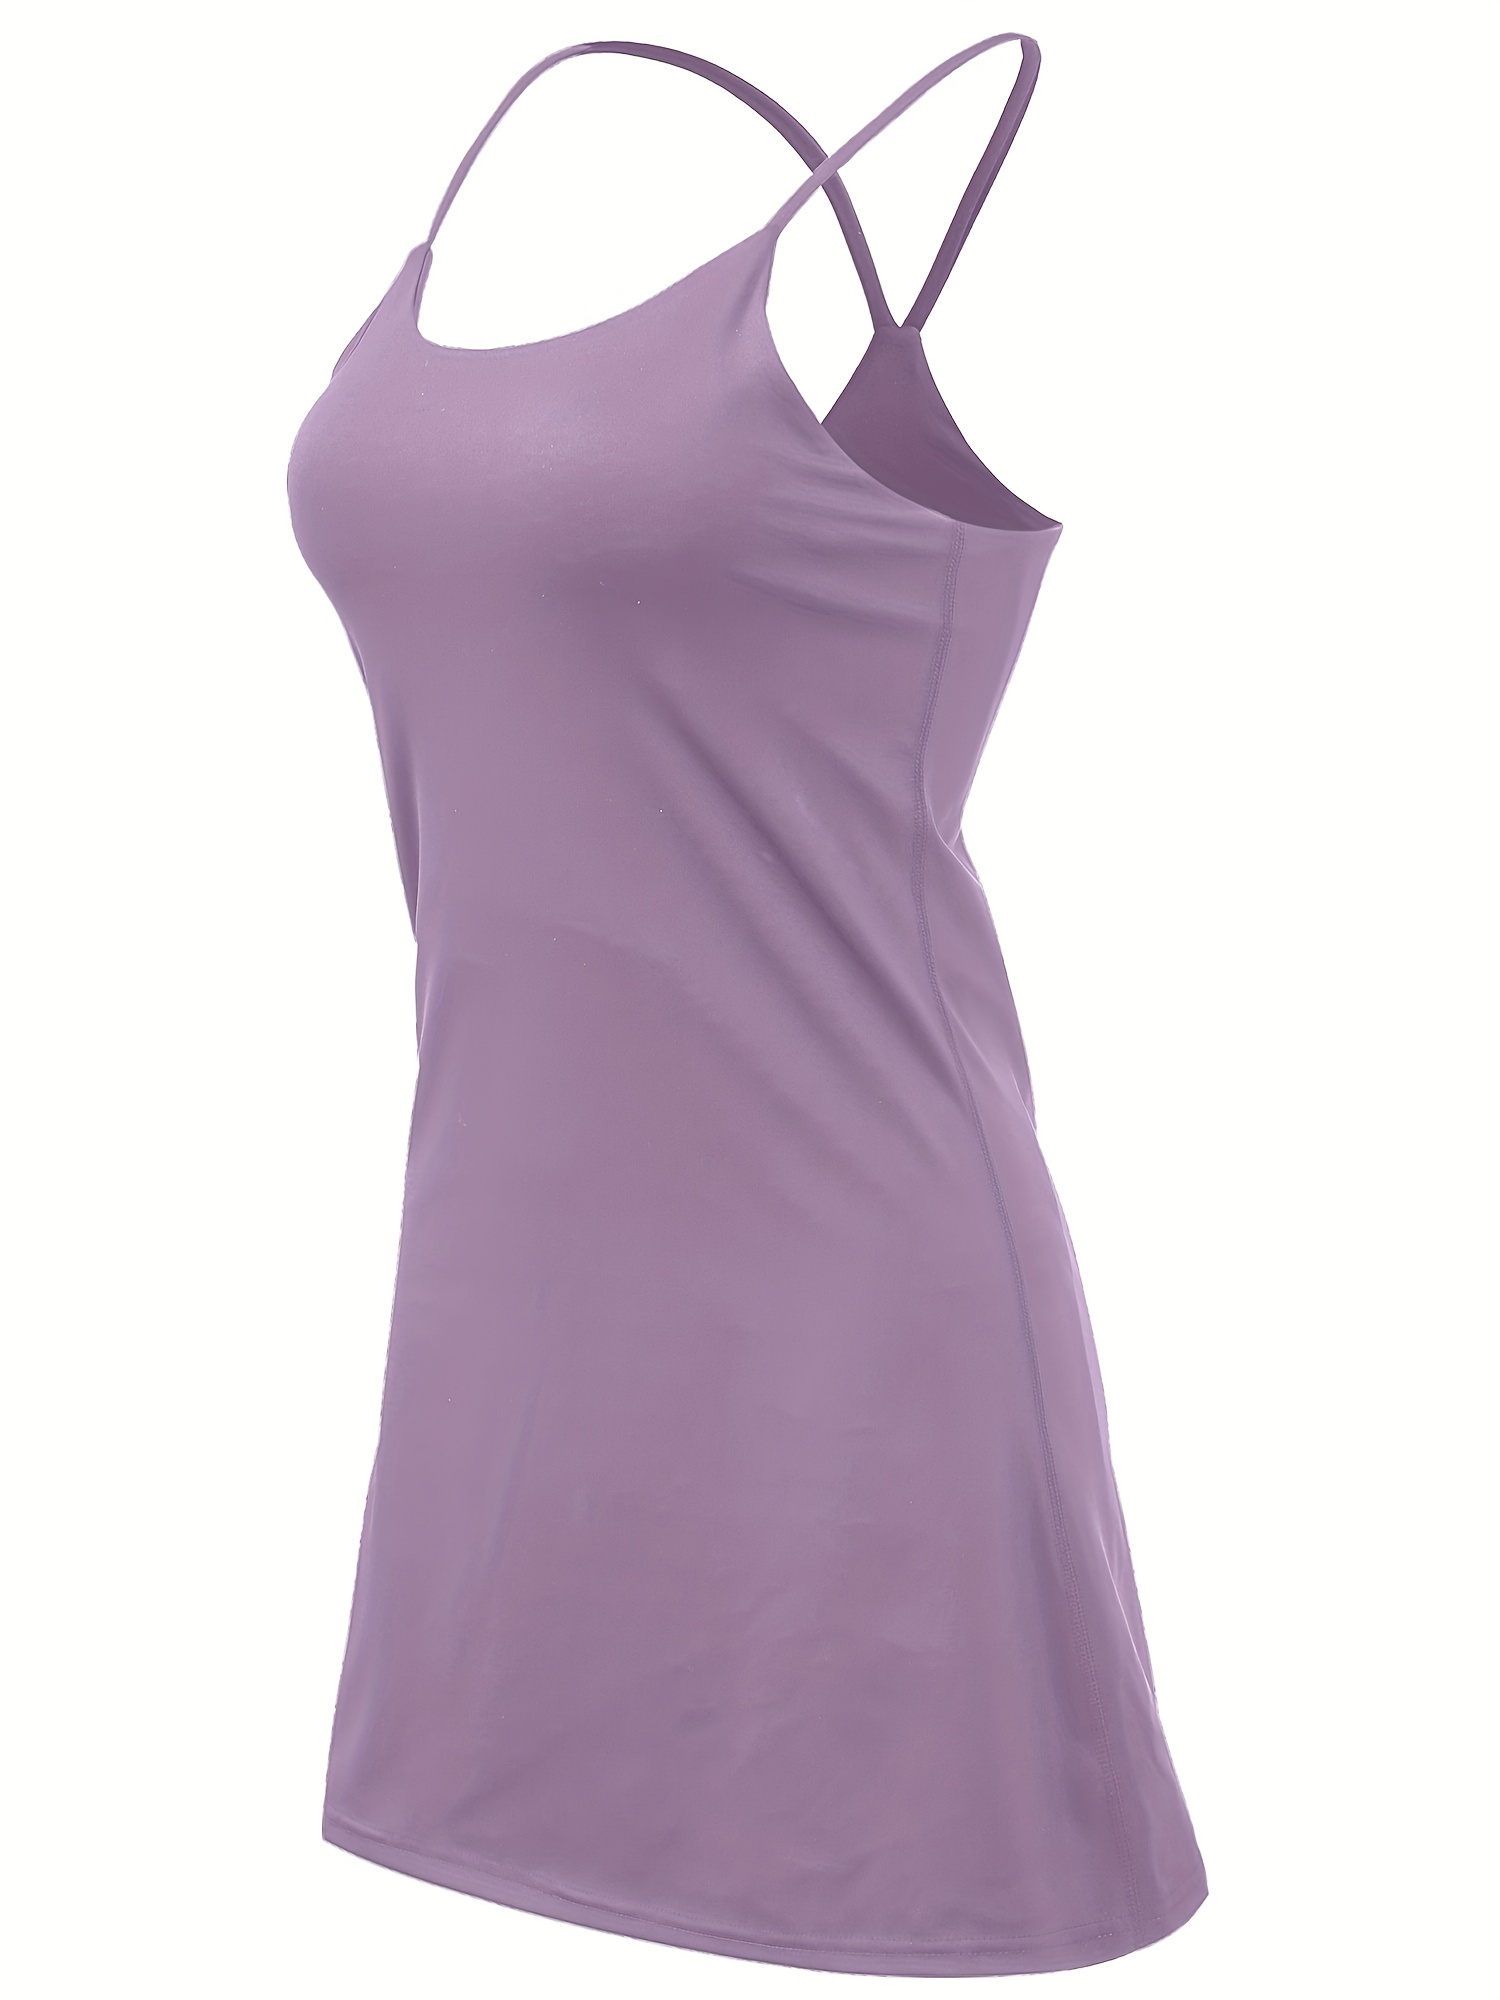 KuaCua Womens Tennis Dress, Workout Golf Dress Built-in with Bra & Shorts  Pocket Sleeveless Athletic Dresses Tie Dye Purple - Bass River Shoes